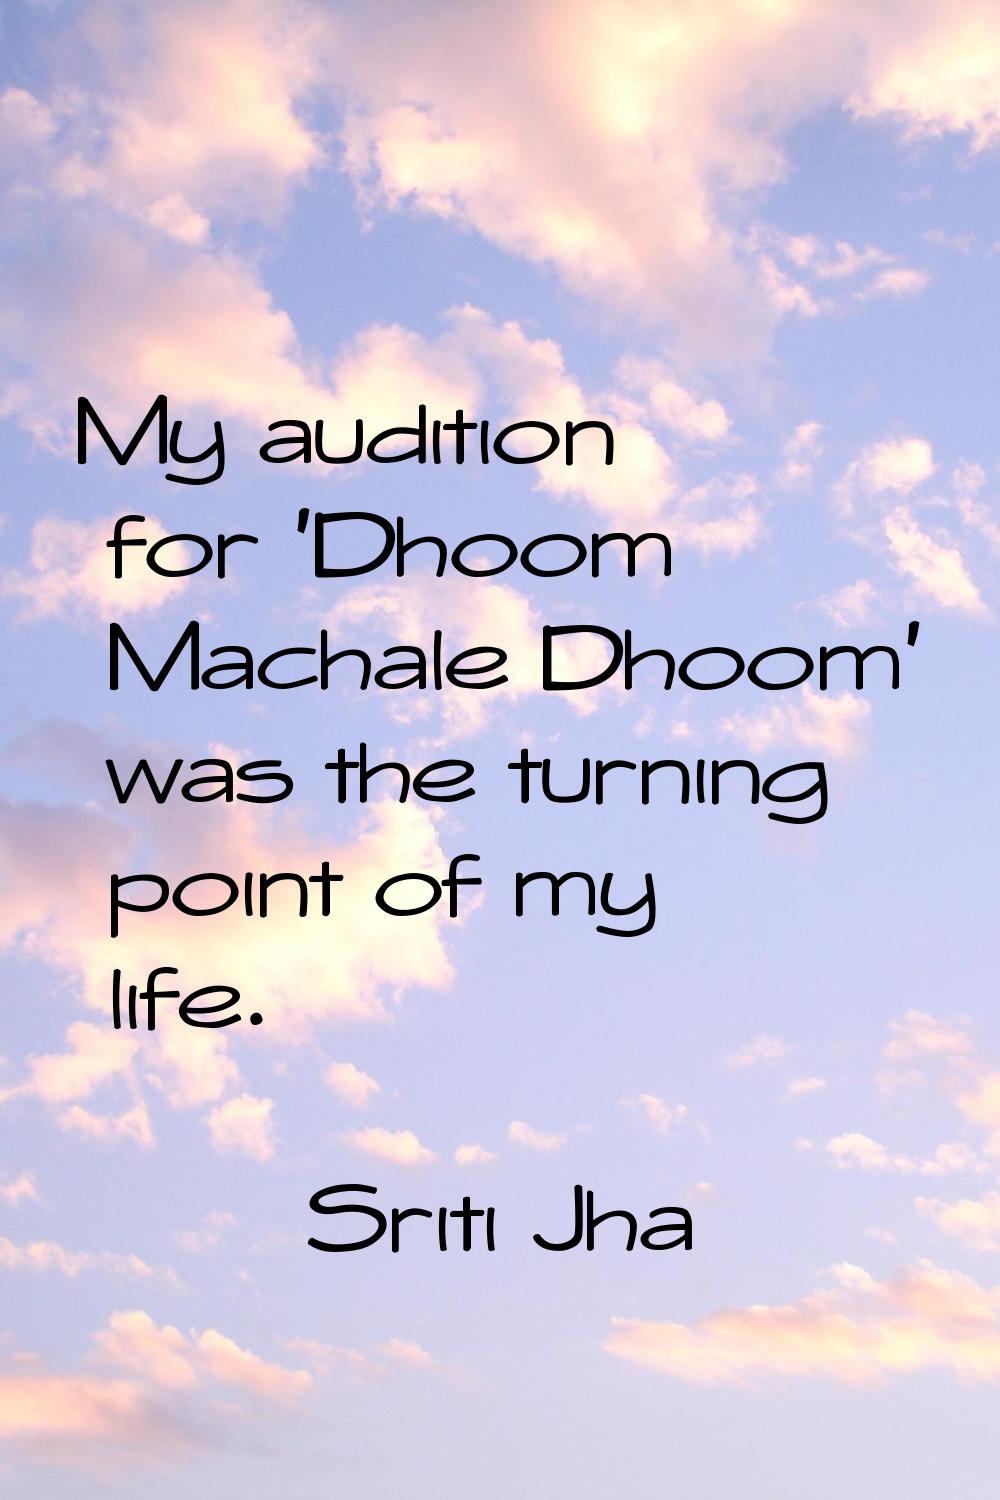 My audition for 'Dhoom Machale Dhoom' was the turning point of my life.